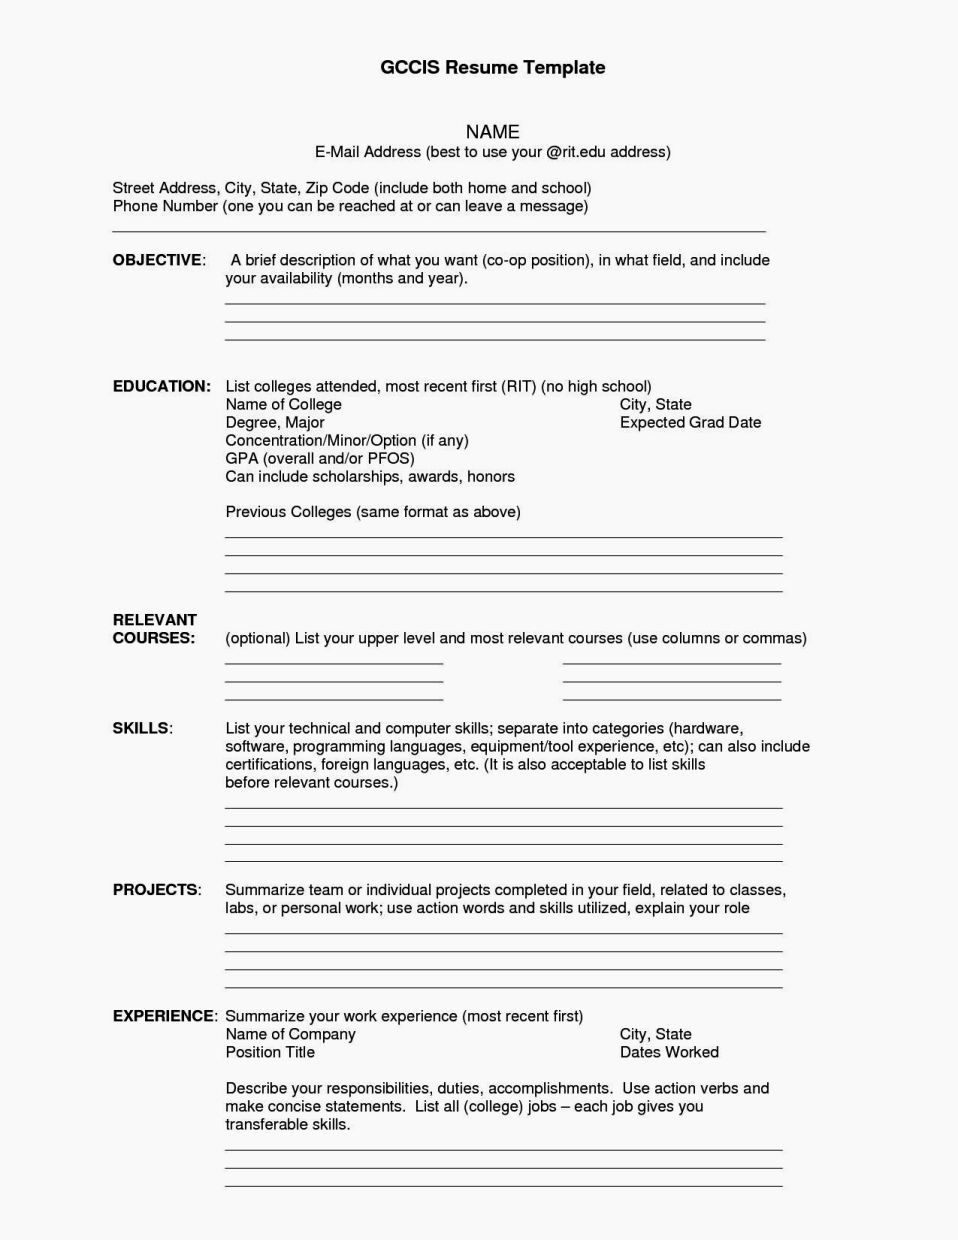 Fill In the Blank Resume Best Of Easy Fill In Resume Resume Template